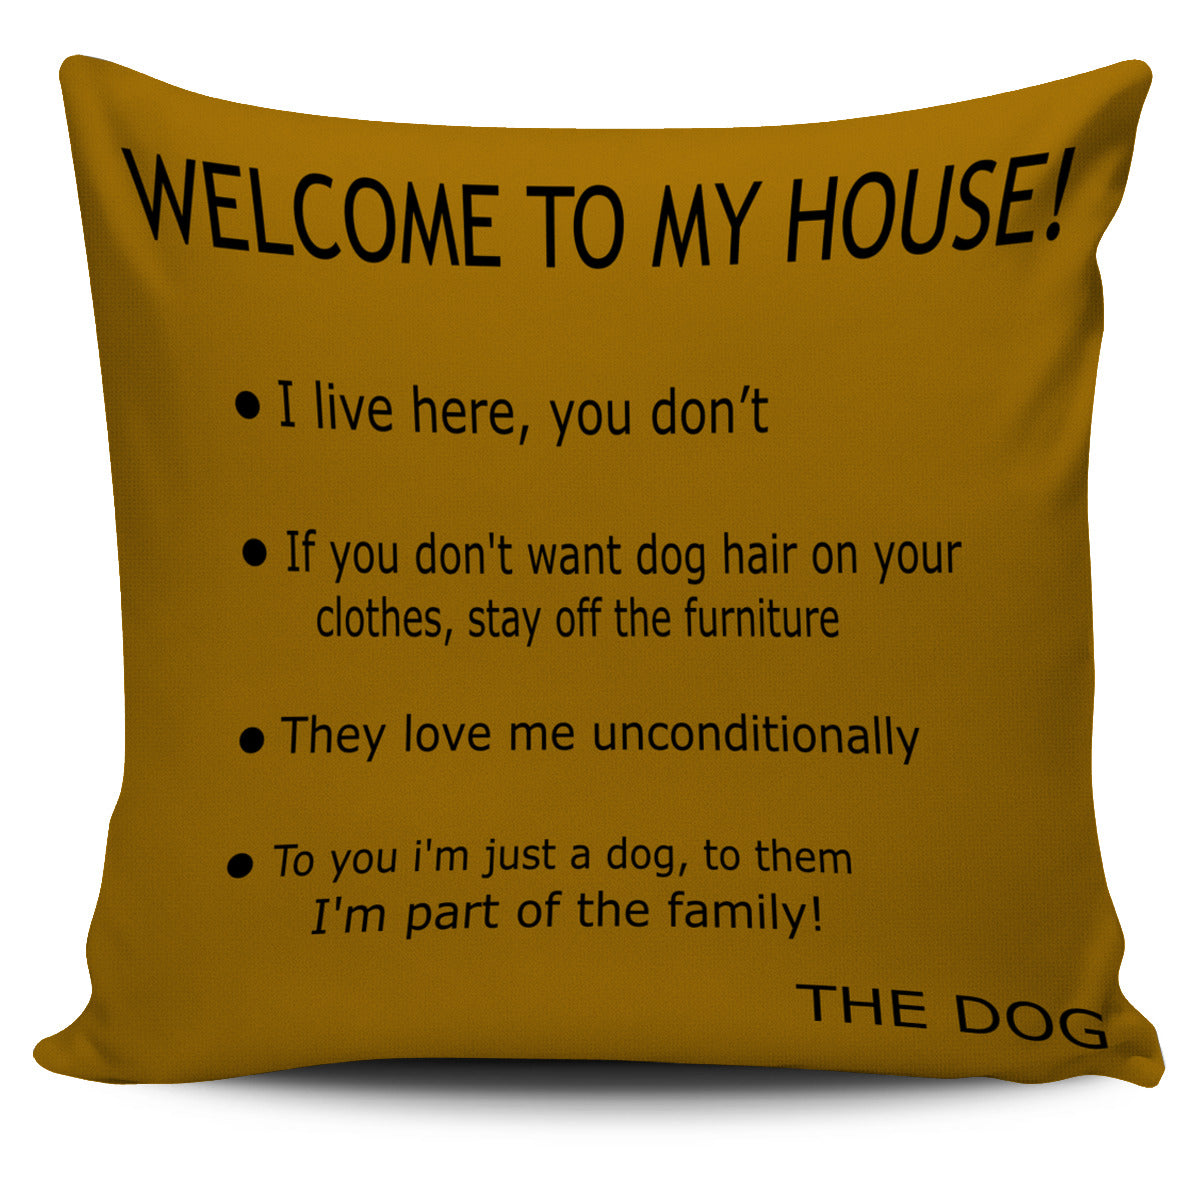 Pillow Cover - Dog's House - Brown